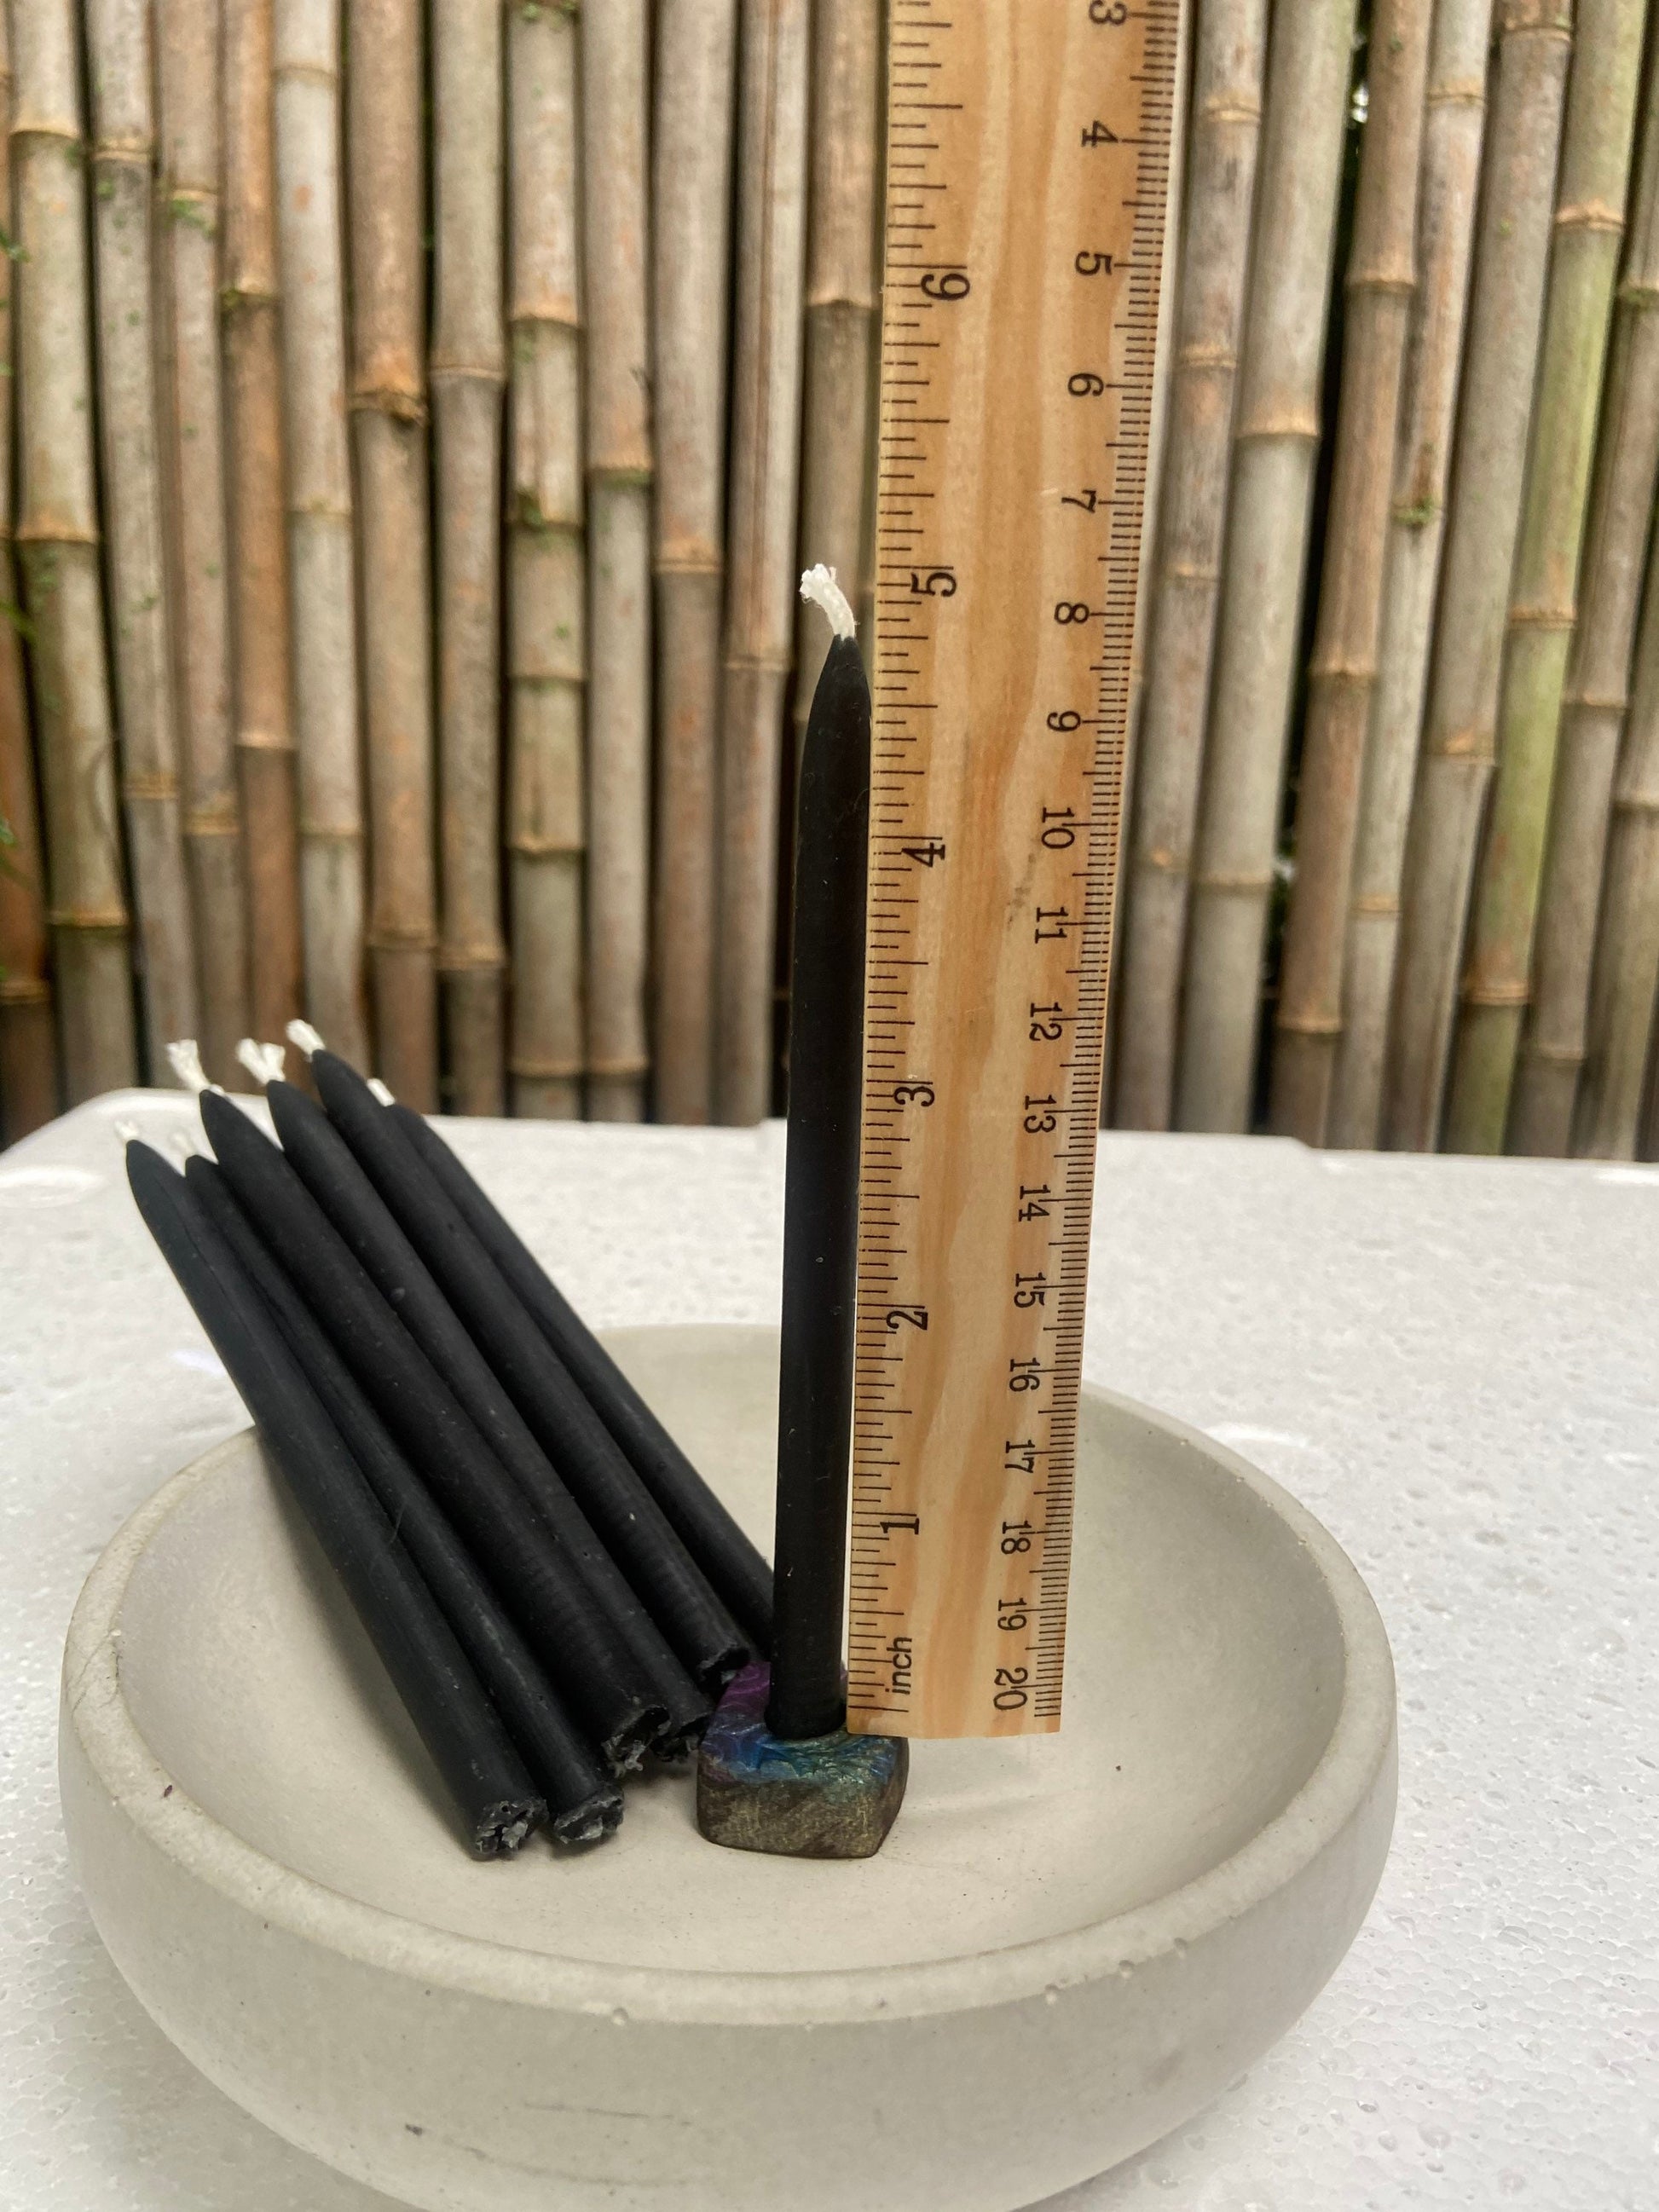 100% Pure Black Beeswax Tiny Taper Candles 5 inch - Birthday-Celebration-Meditation-Prayer-Tiny Tapers-Small Tapers-Mini Tapers-Set of 10